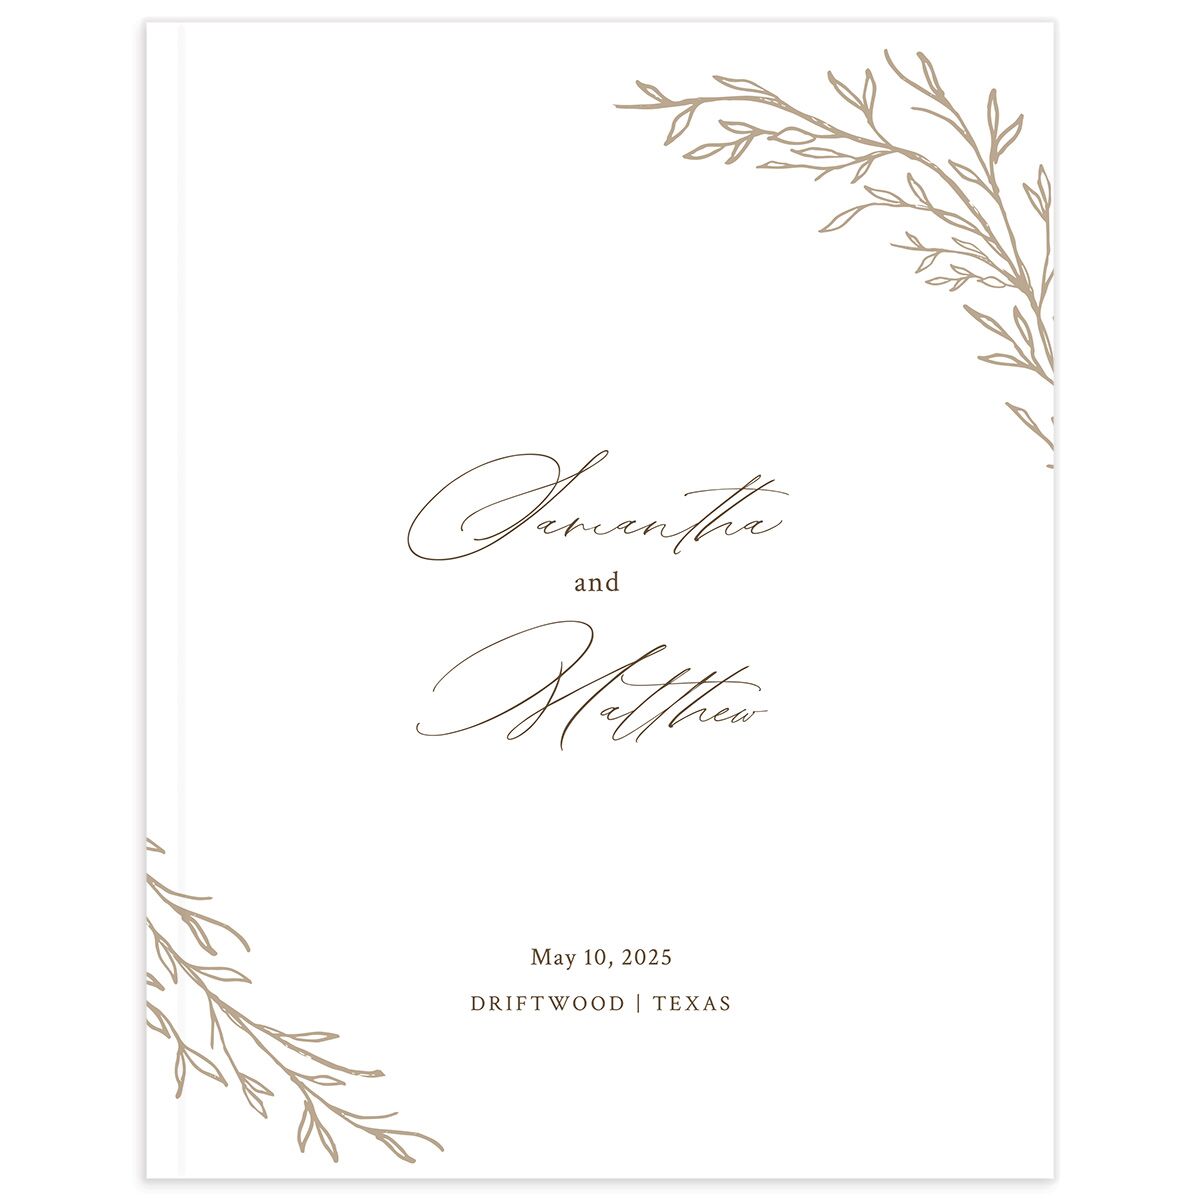 Rustic Branches Wedding Guest Book